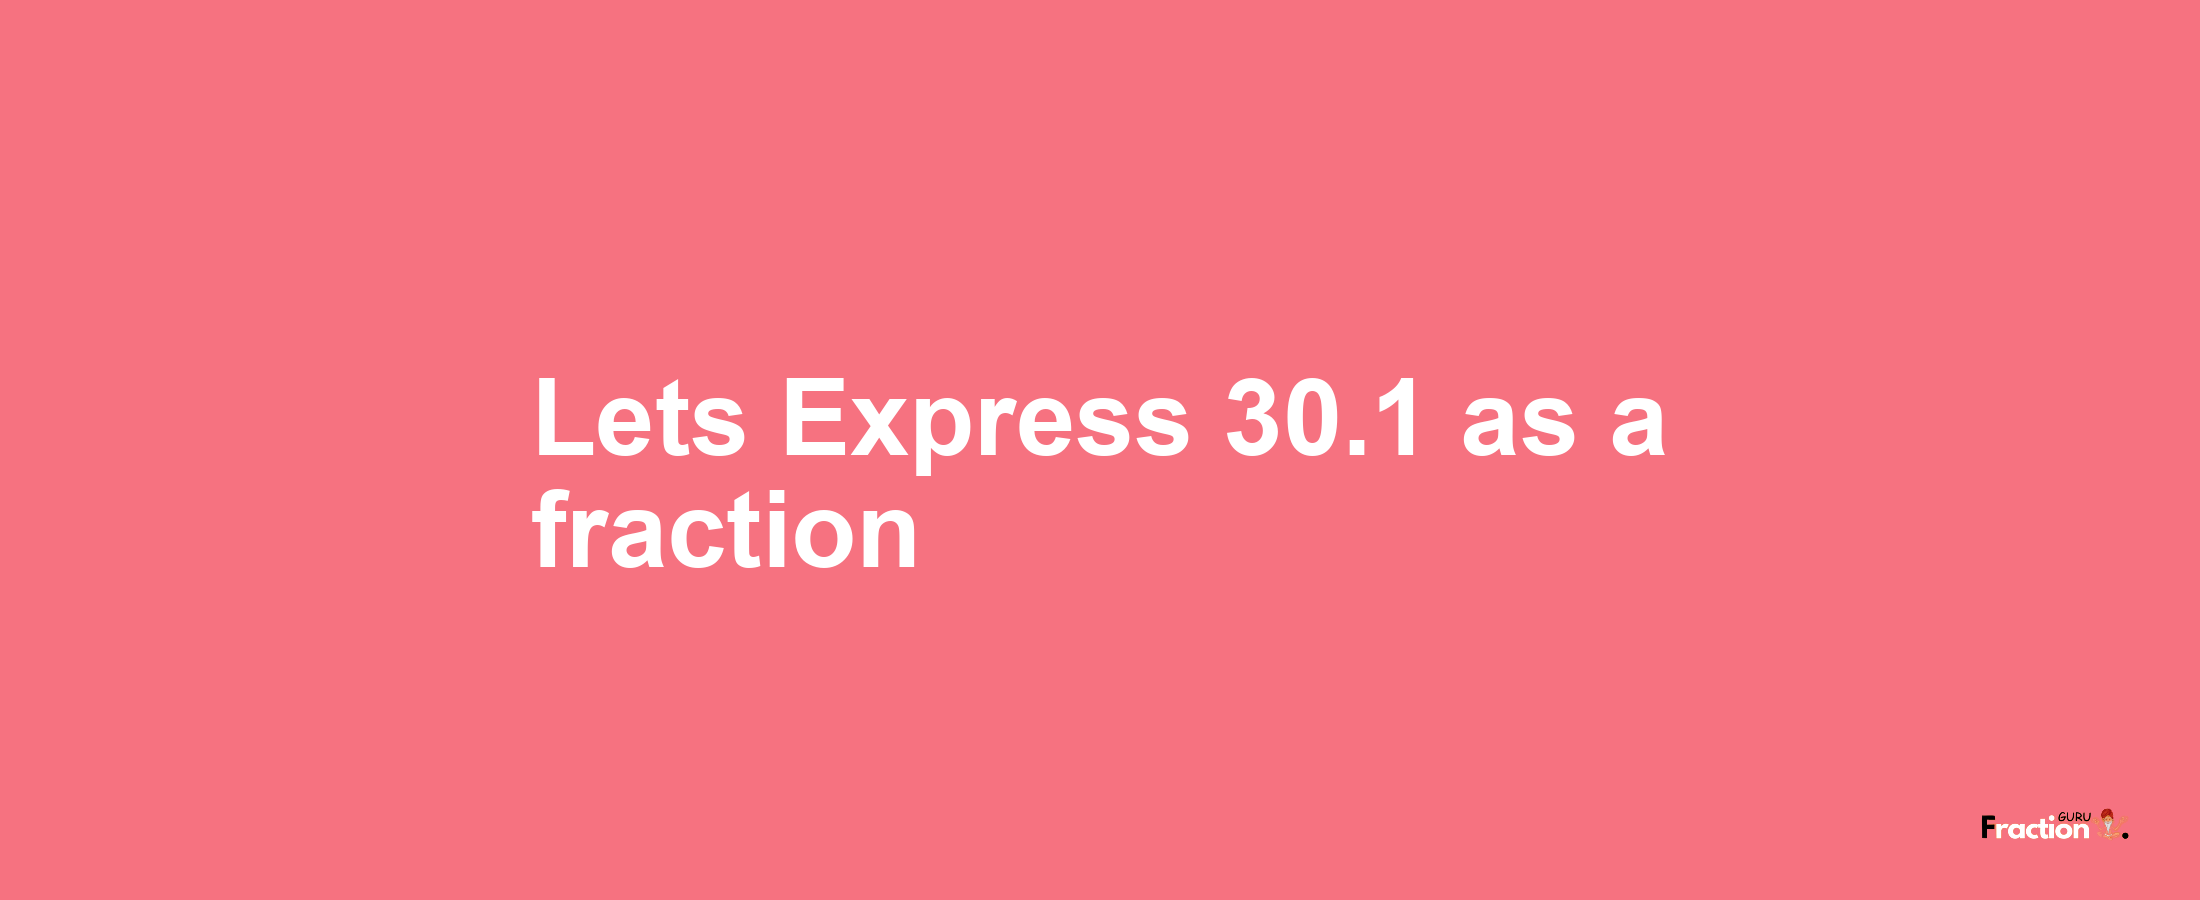 Lets Express 30.1 as afraction